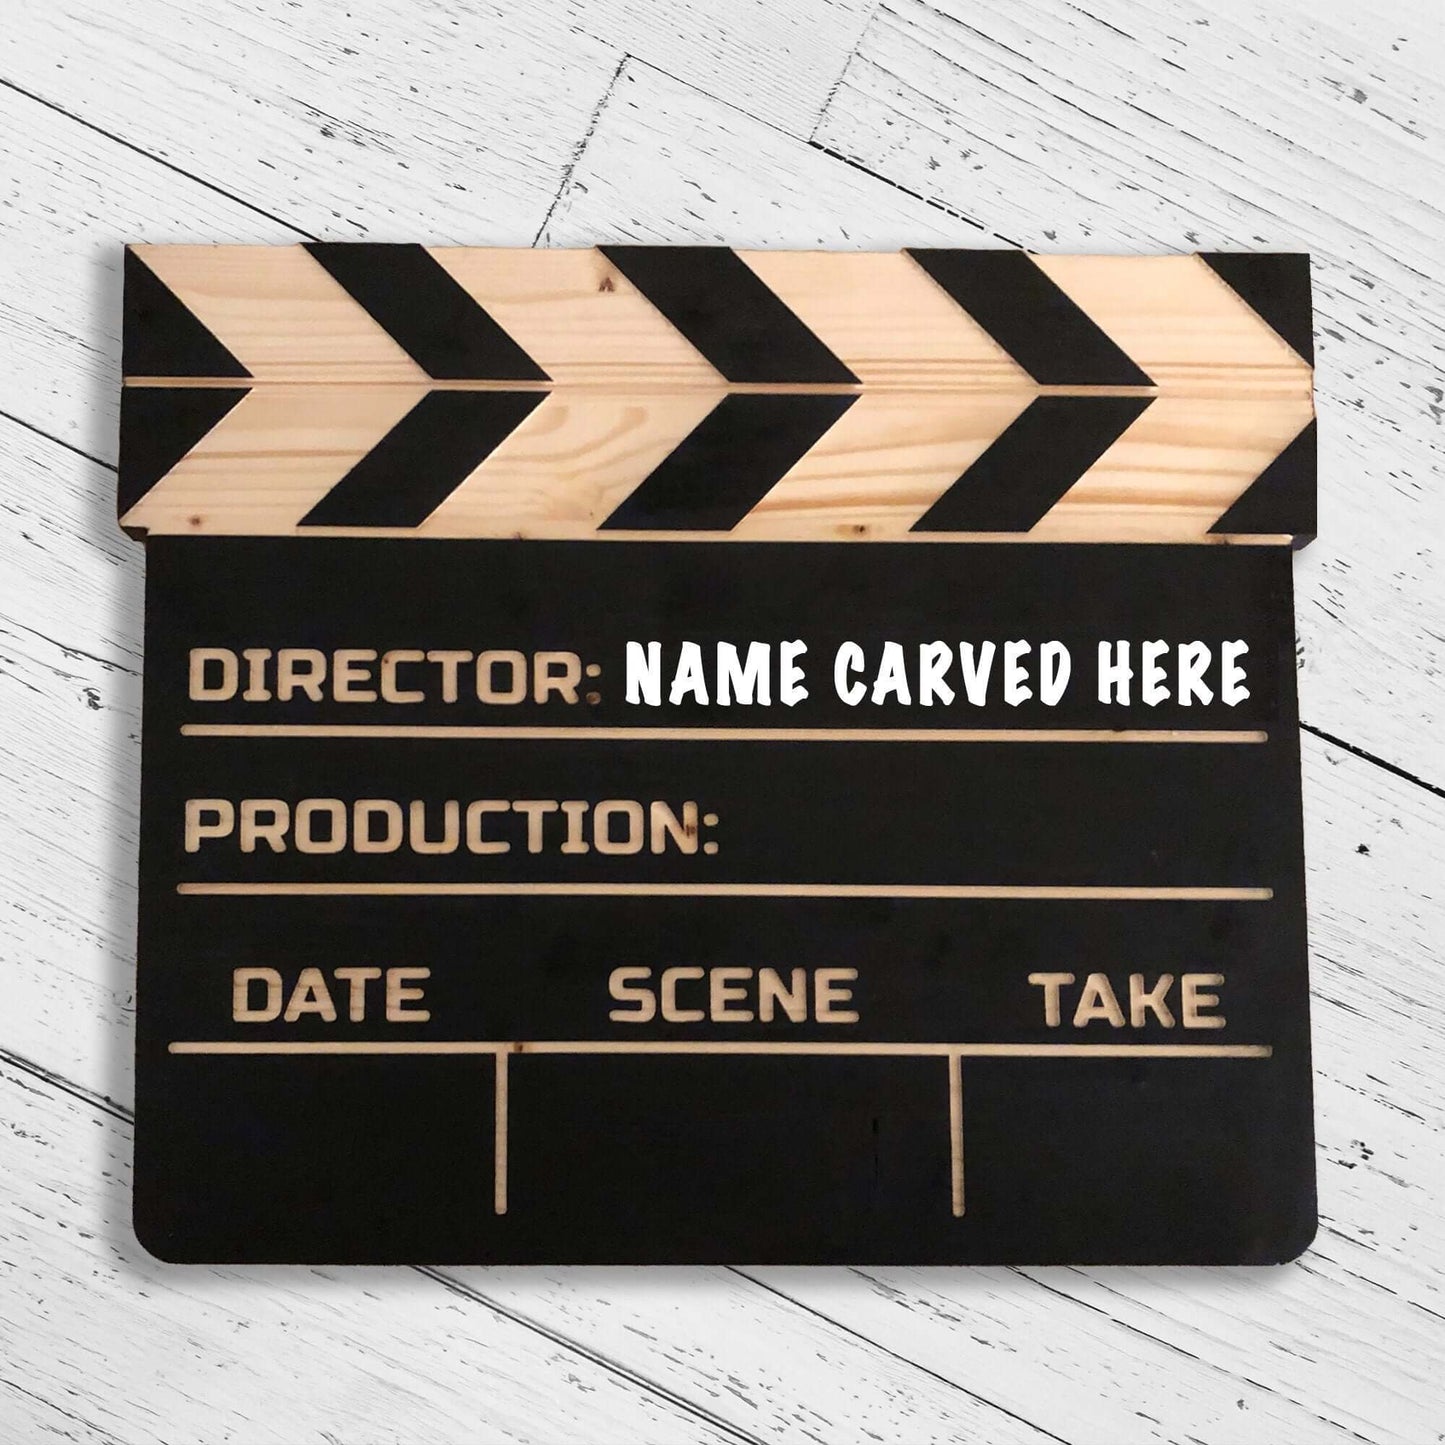 Customized Wooden Clapperboard Replica